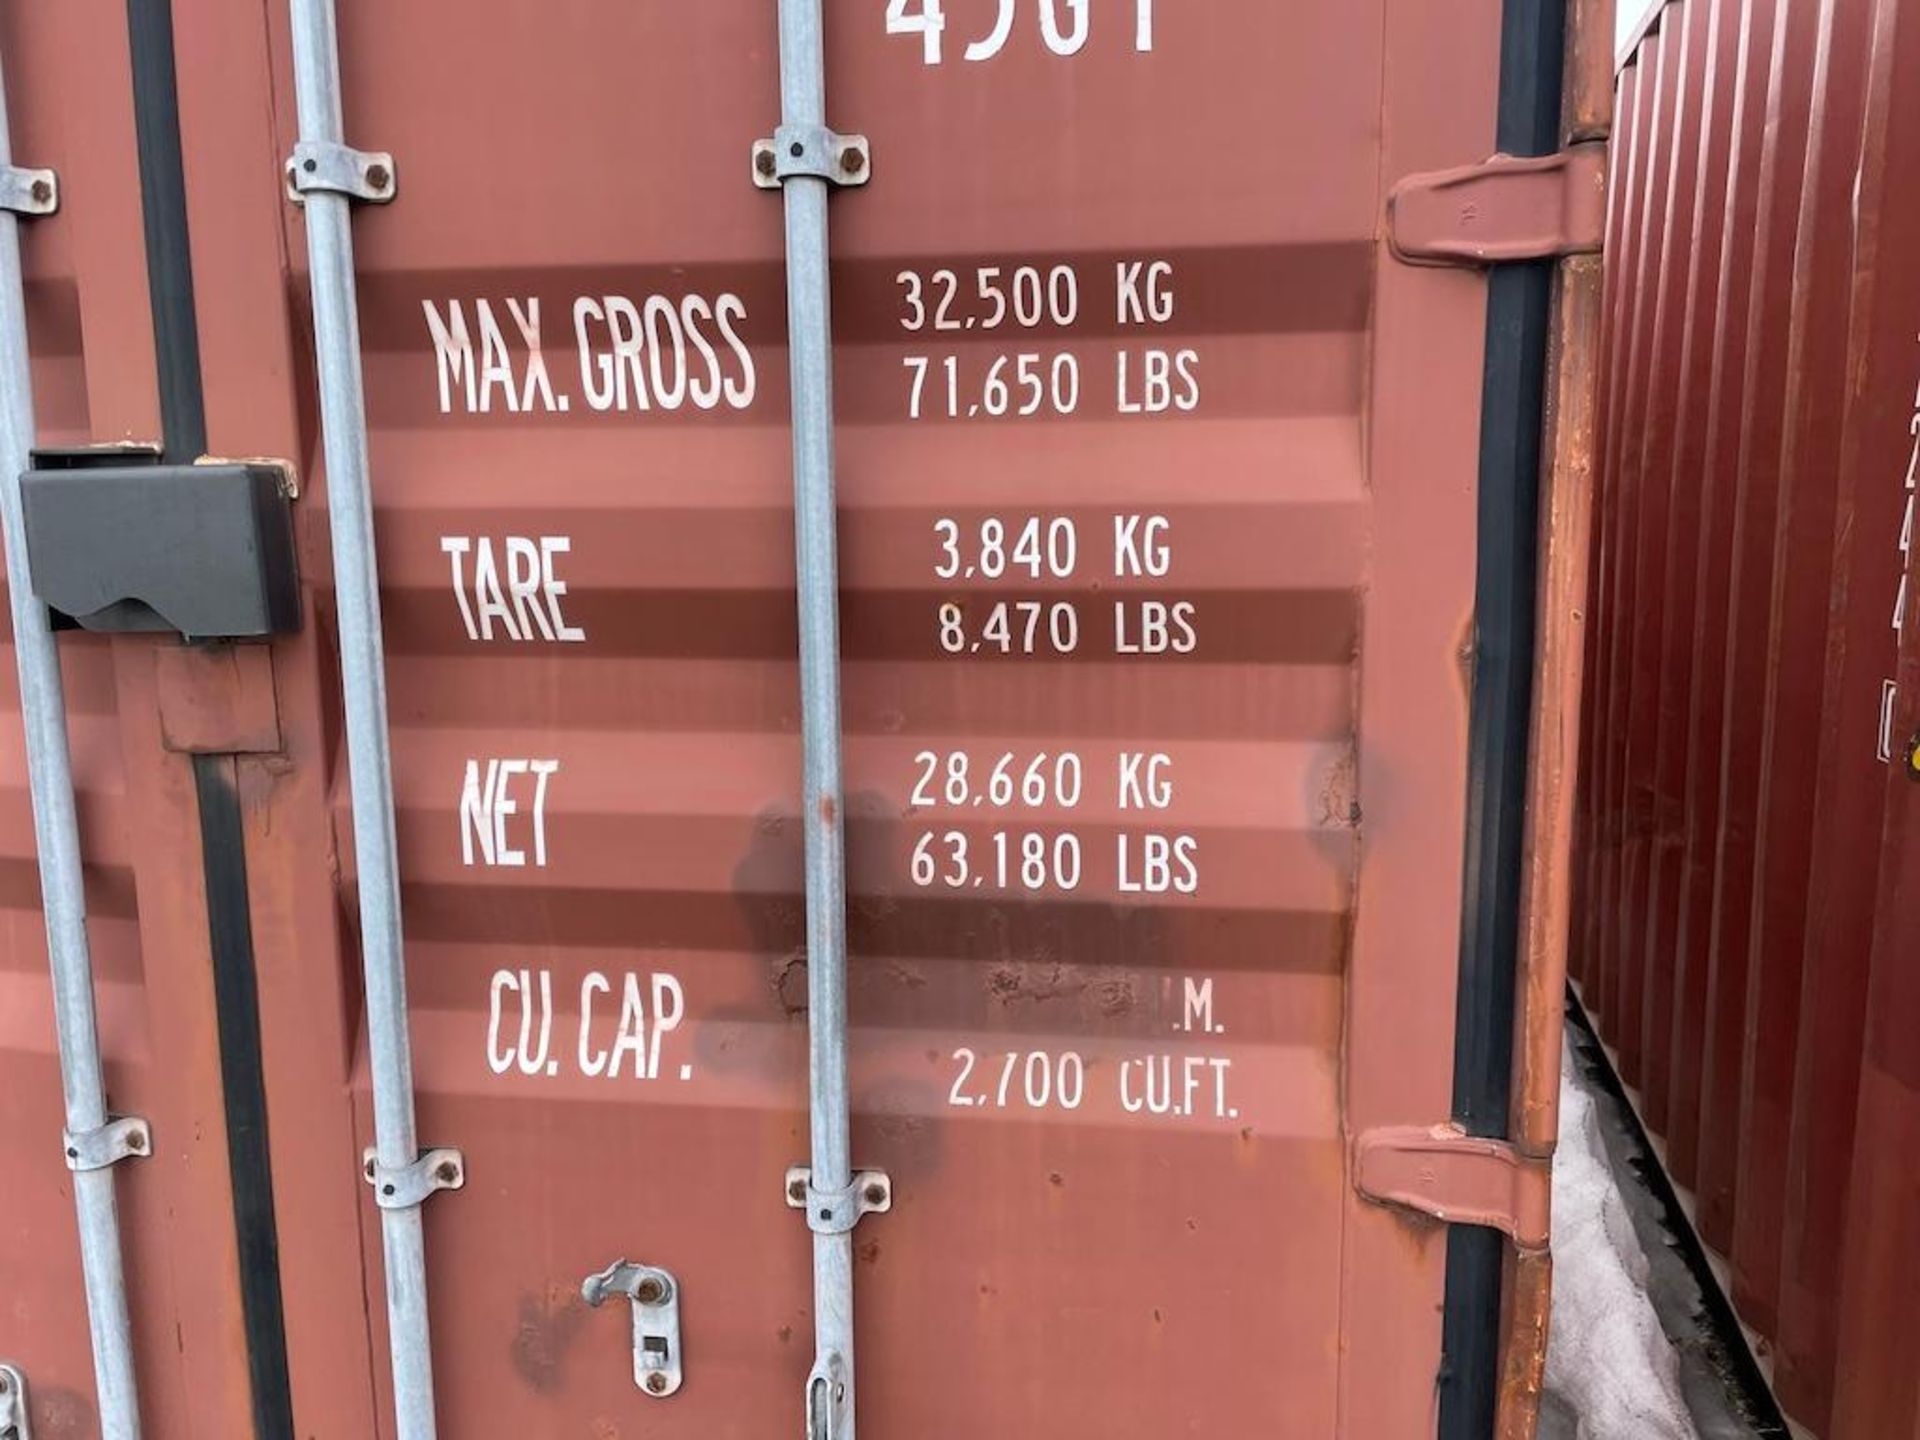 40 FT SEA CONTAINER, EXCLUDING CONTENTS, DELAYED PICK UP UNTIL MAY 13 [11] [TROIS RIVIERES] *PLEASE - Image 3 of 4